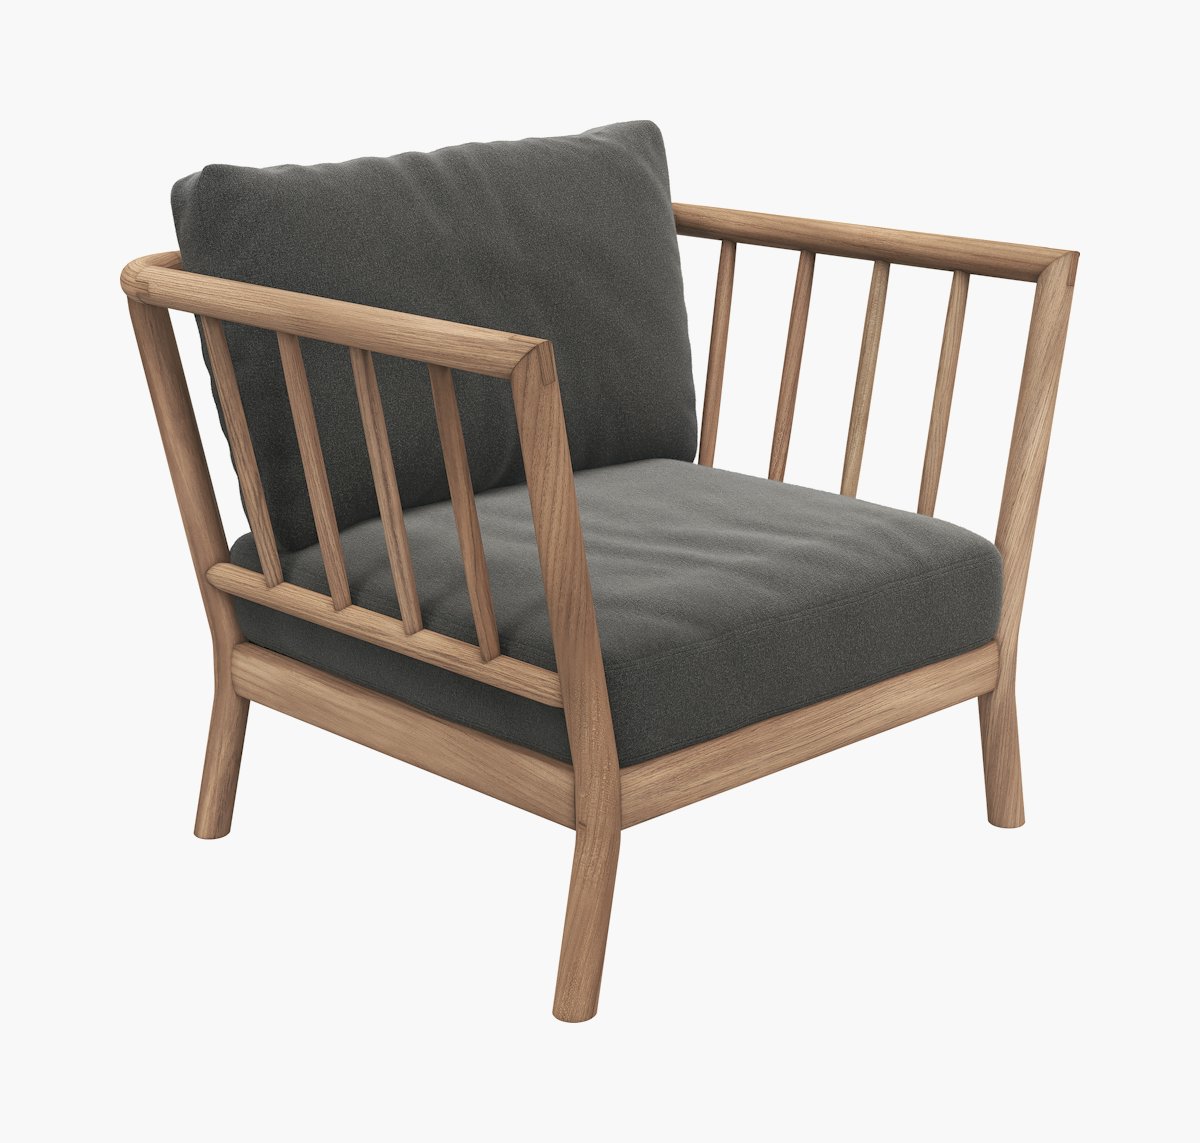 Tradition Outdoor Lounge Chair